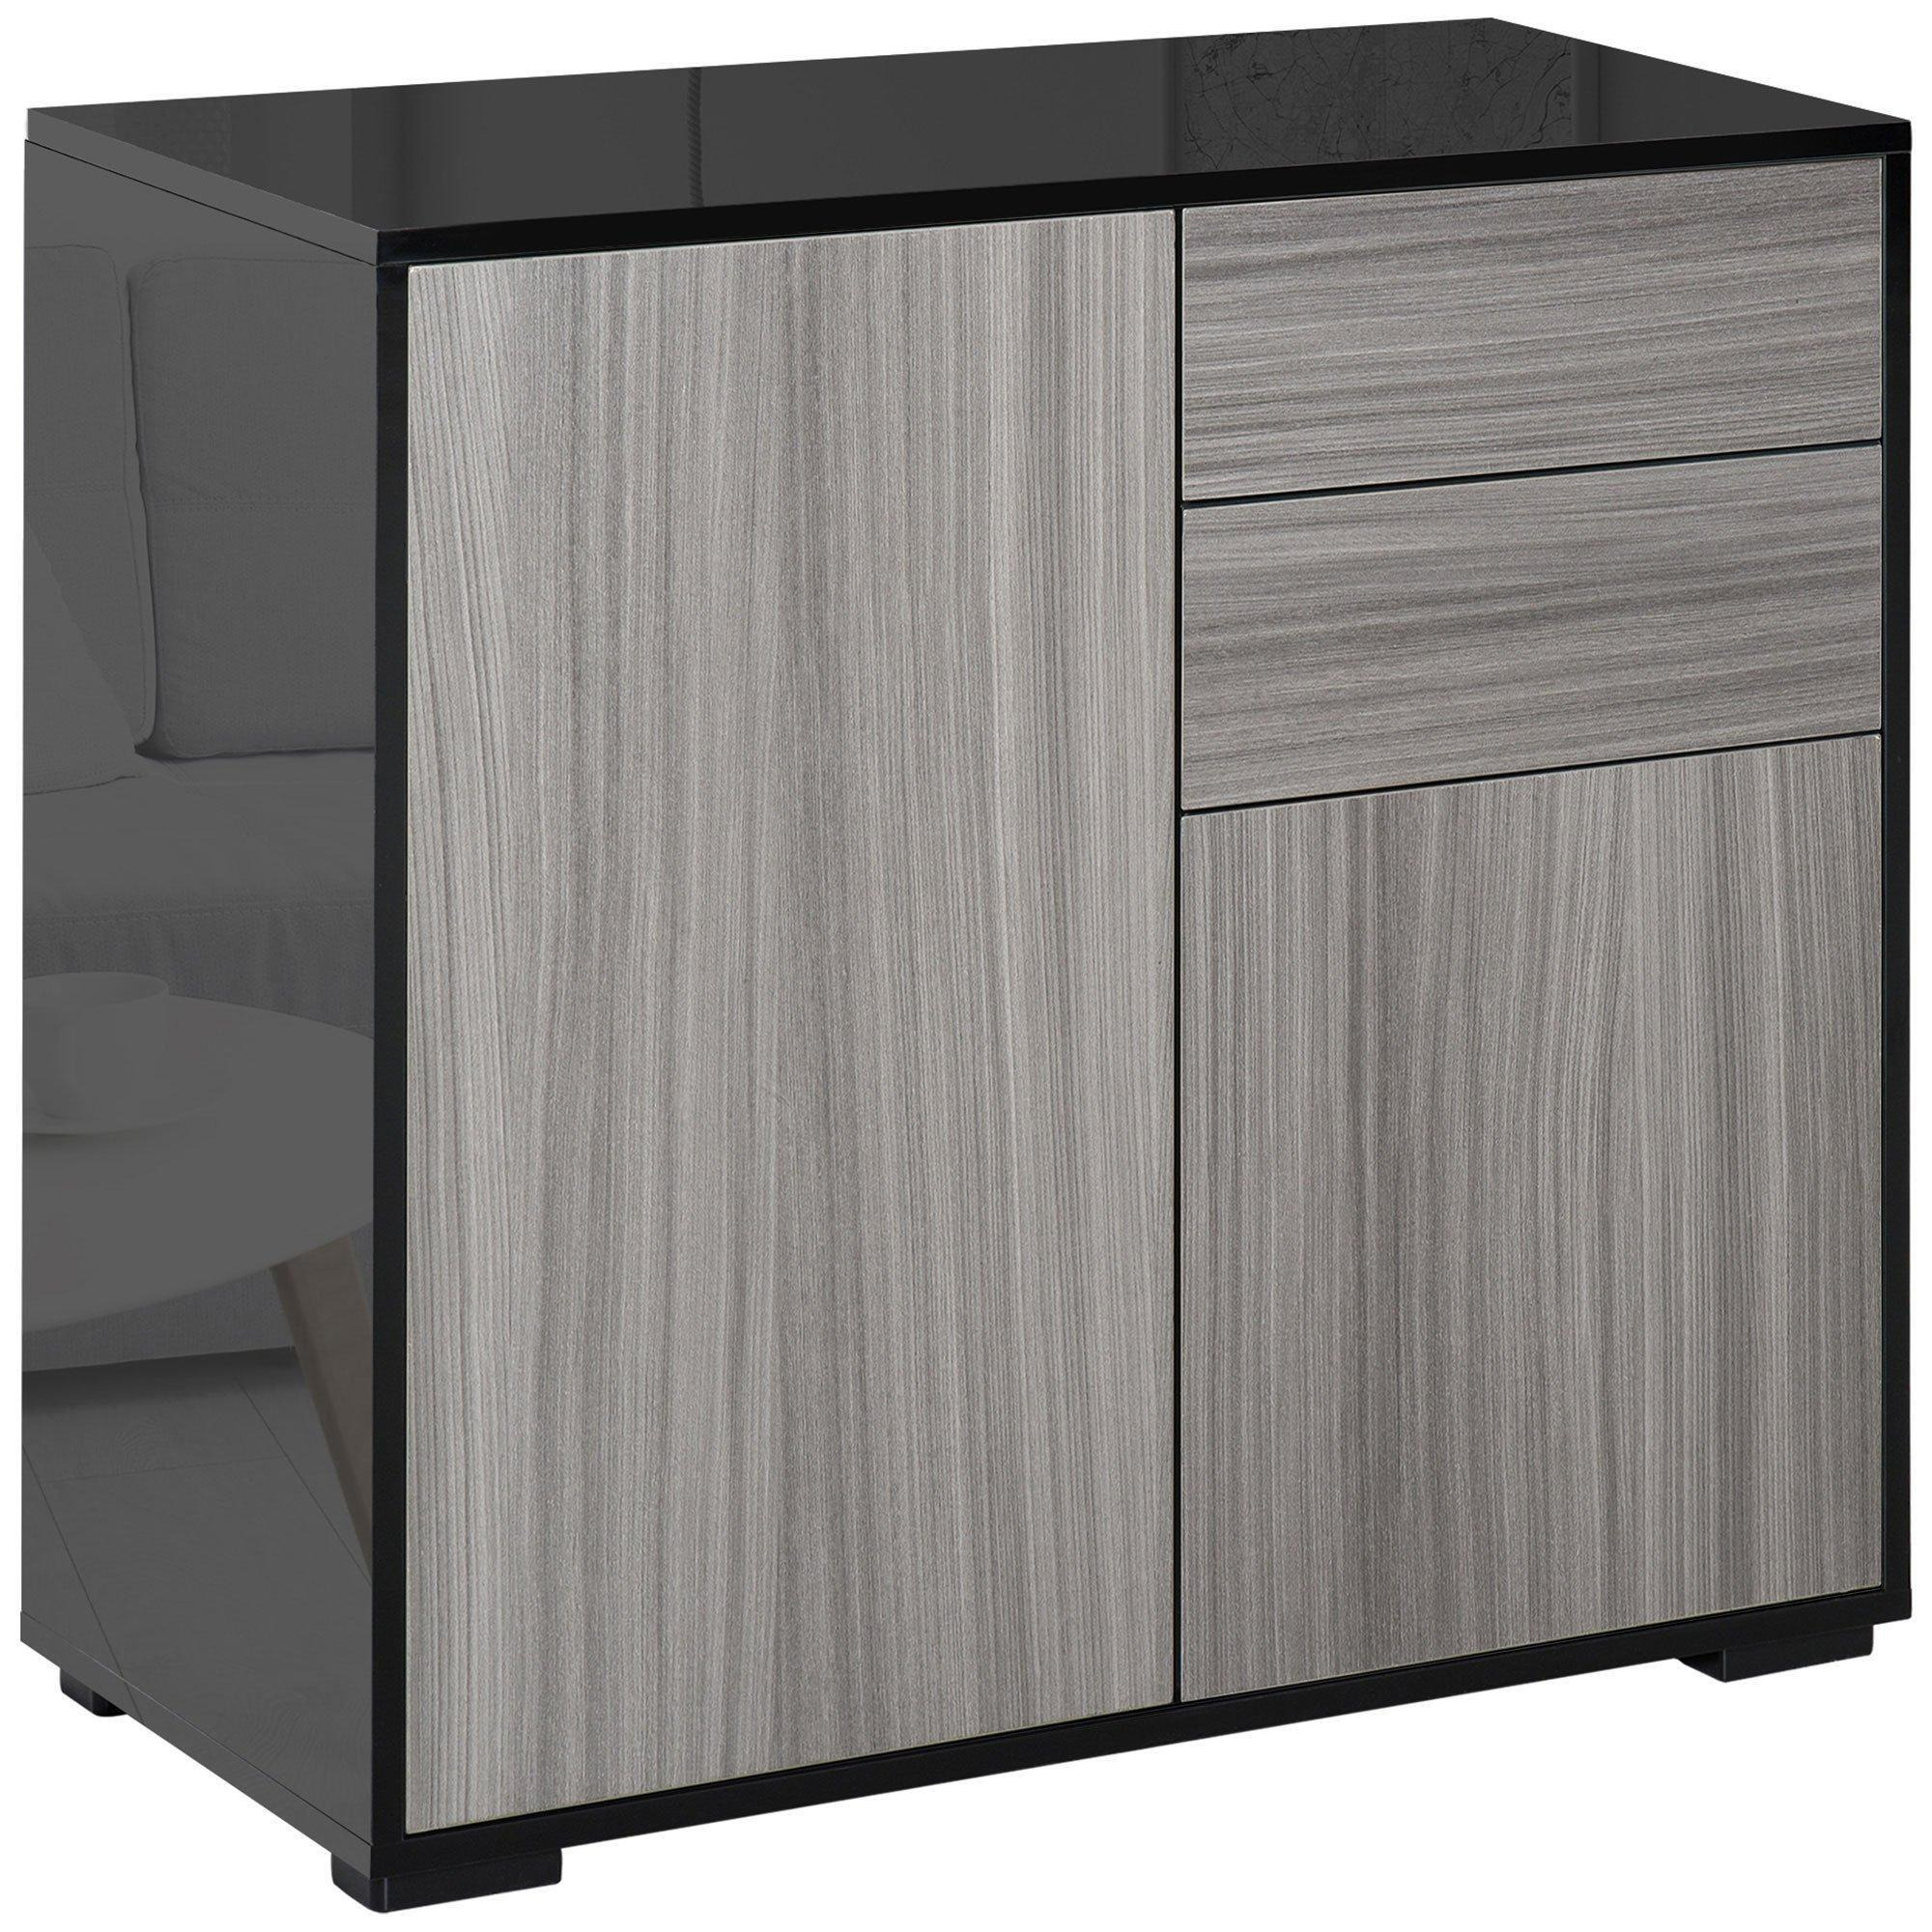 Push-Open Side Cabinet with 2 Drawer 2 Door Cabinet for Home Office - image 1